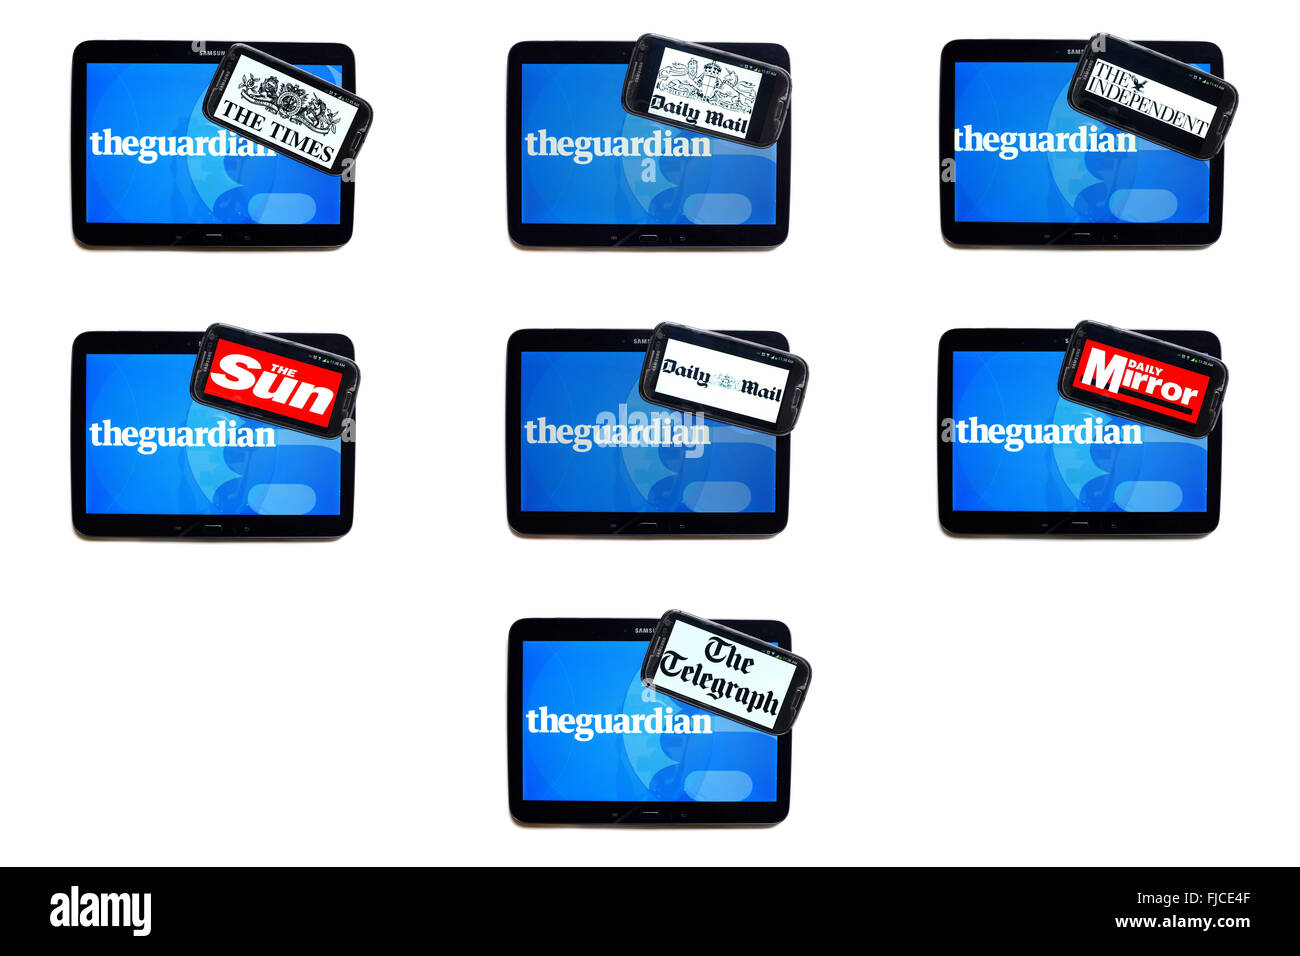 The Guardian newspaper logo on tablet screens surrounded by smartphones displaying the logos of rival newspapers. Stock Photo